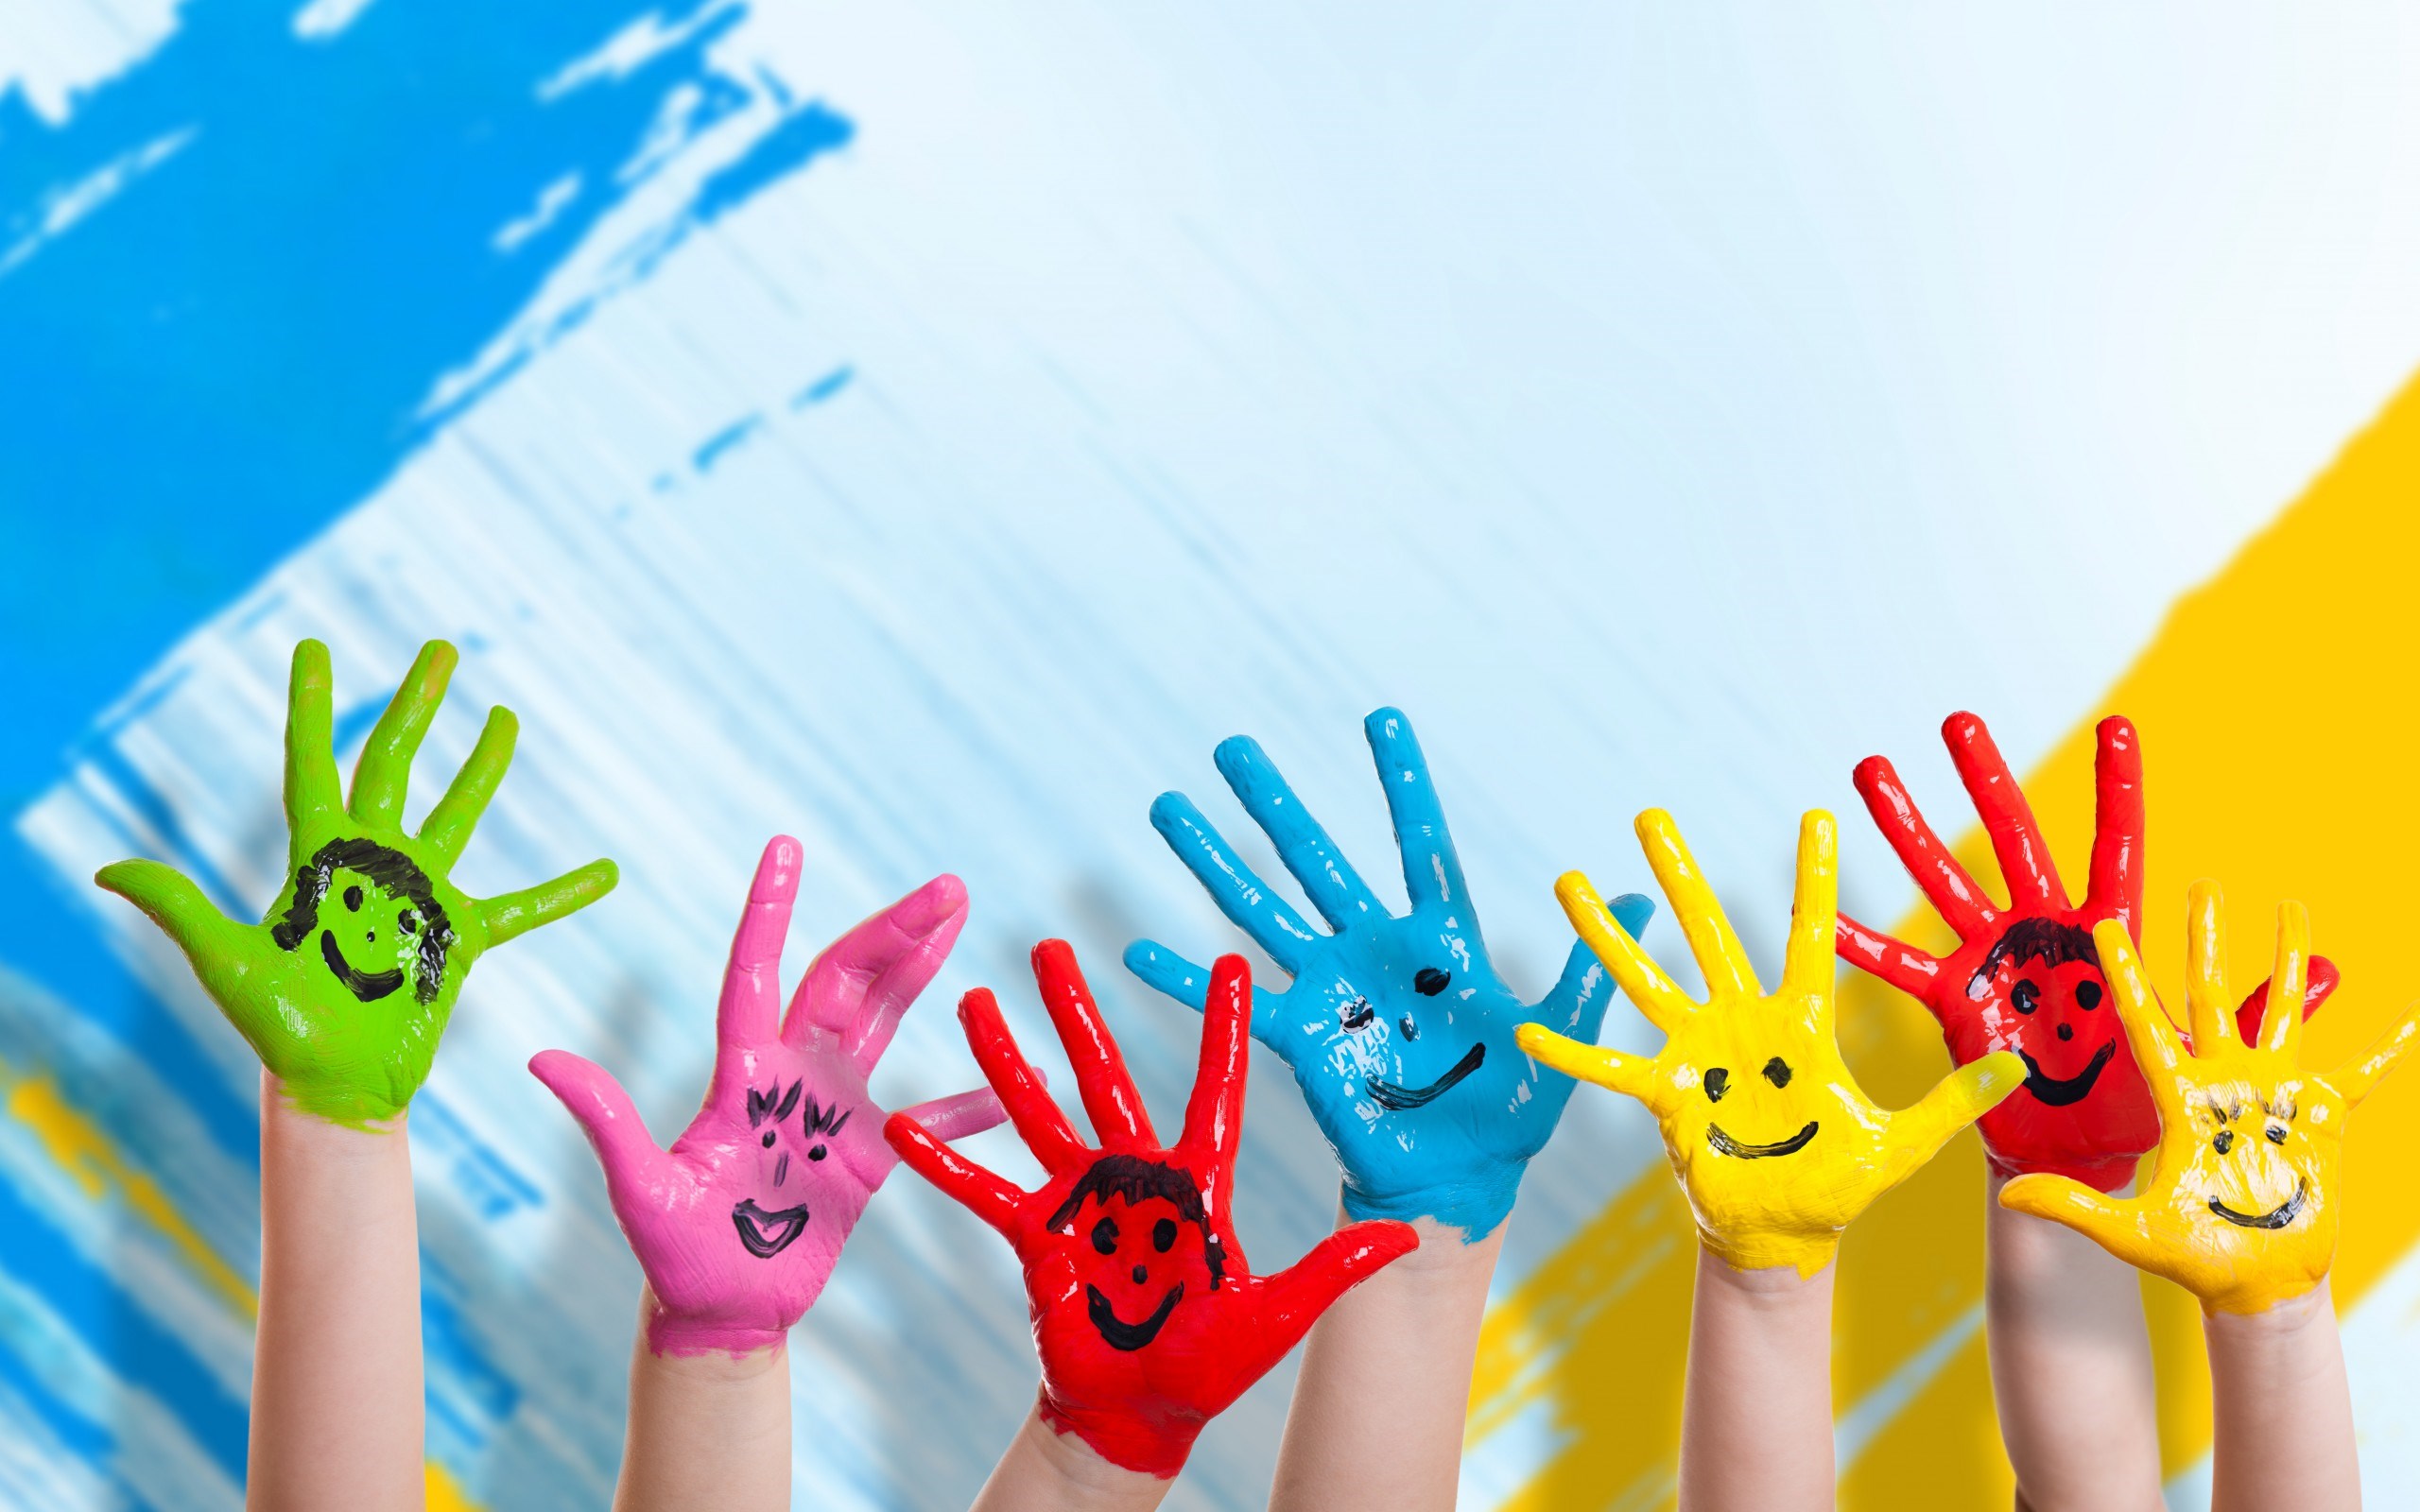 kids-hands-smiles-drawing-happiness-wallpaper-2560x1600